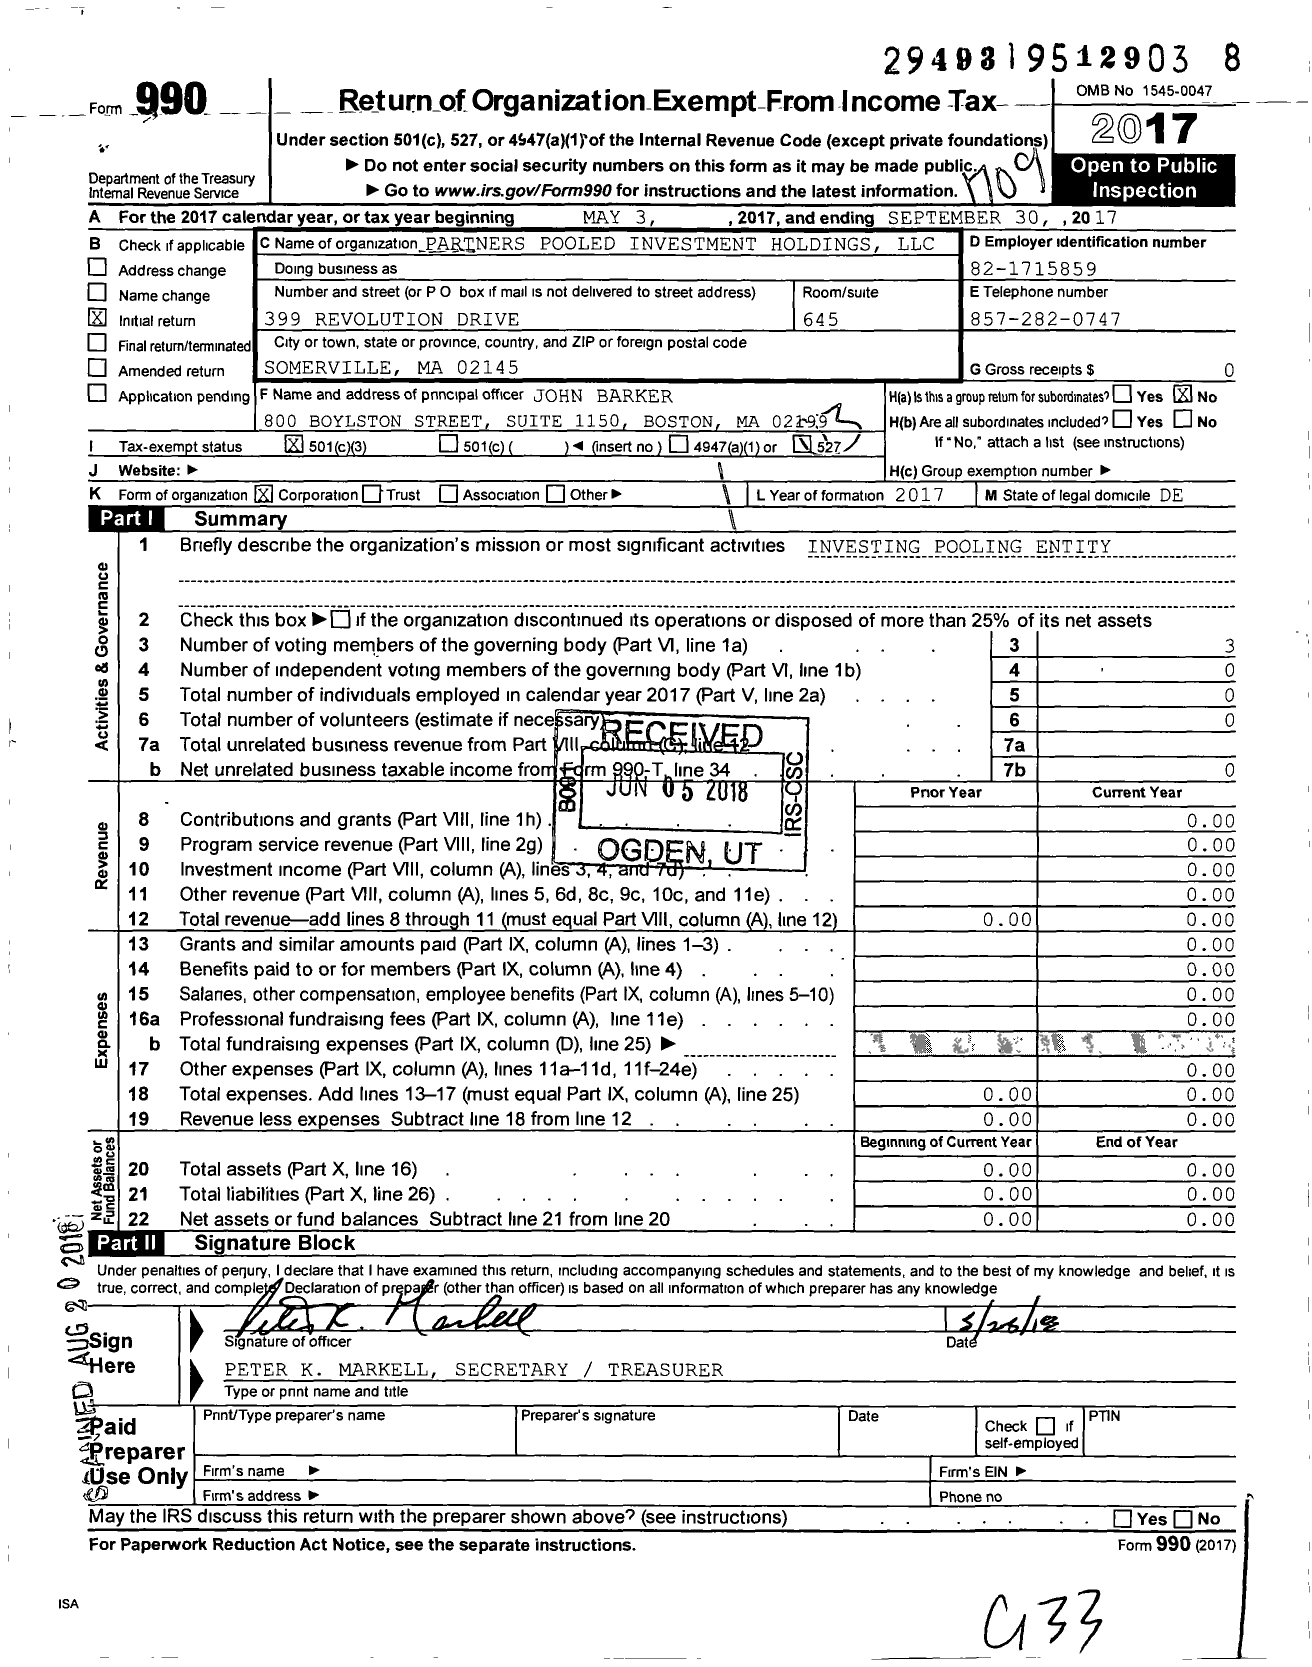 Image of first page of 2016 Form 990 for MGB Pooled Holdings LLC